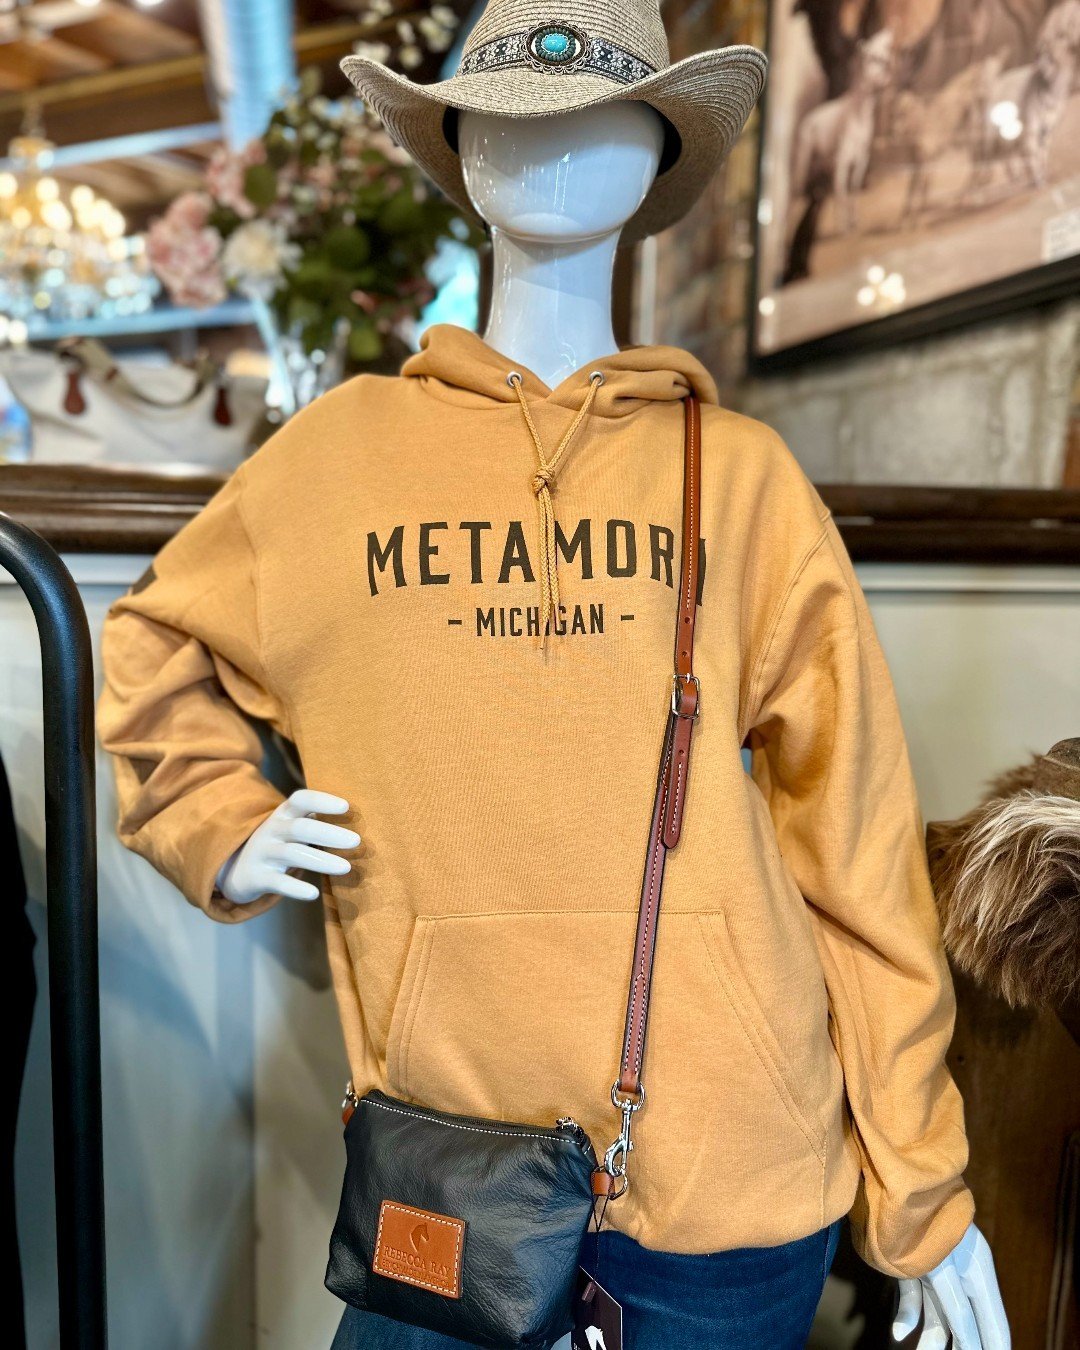 Give mom the gift of being cozy (great for cooler spring evenings) with a Metamora hoodie.  Add in a Rebecca Ray crossbody bag and she'll be especially tickled. 

We're open today for those last-minute gift hunters.  Happy Mother's Day to all the mom